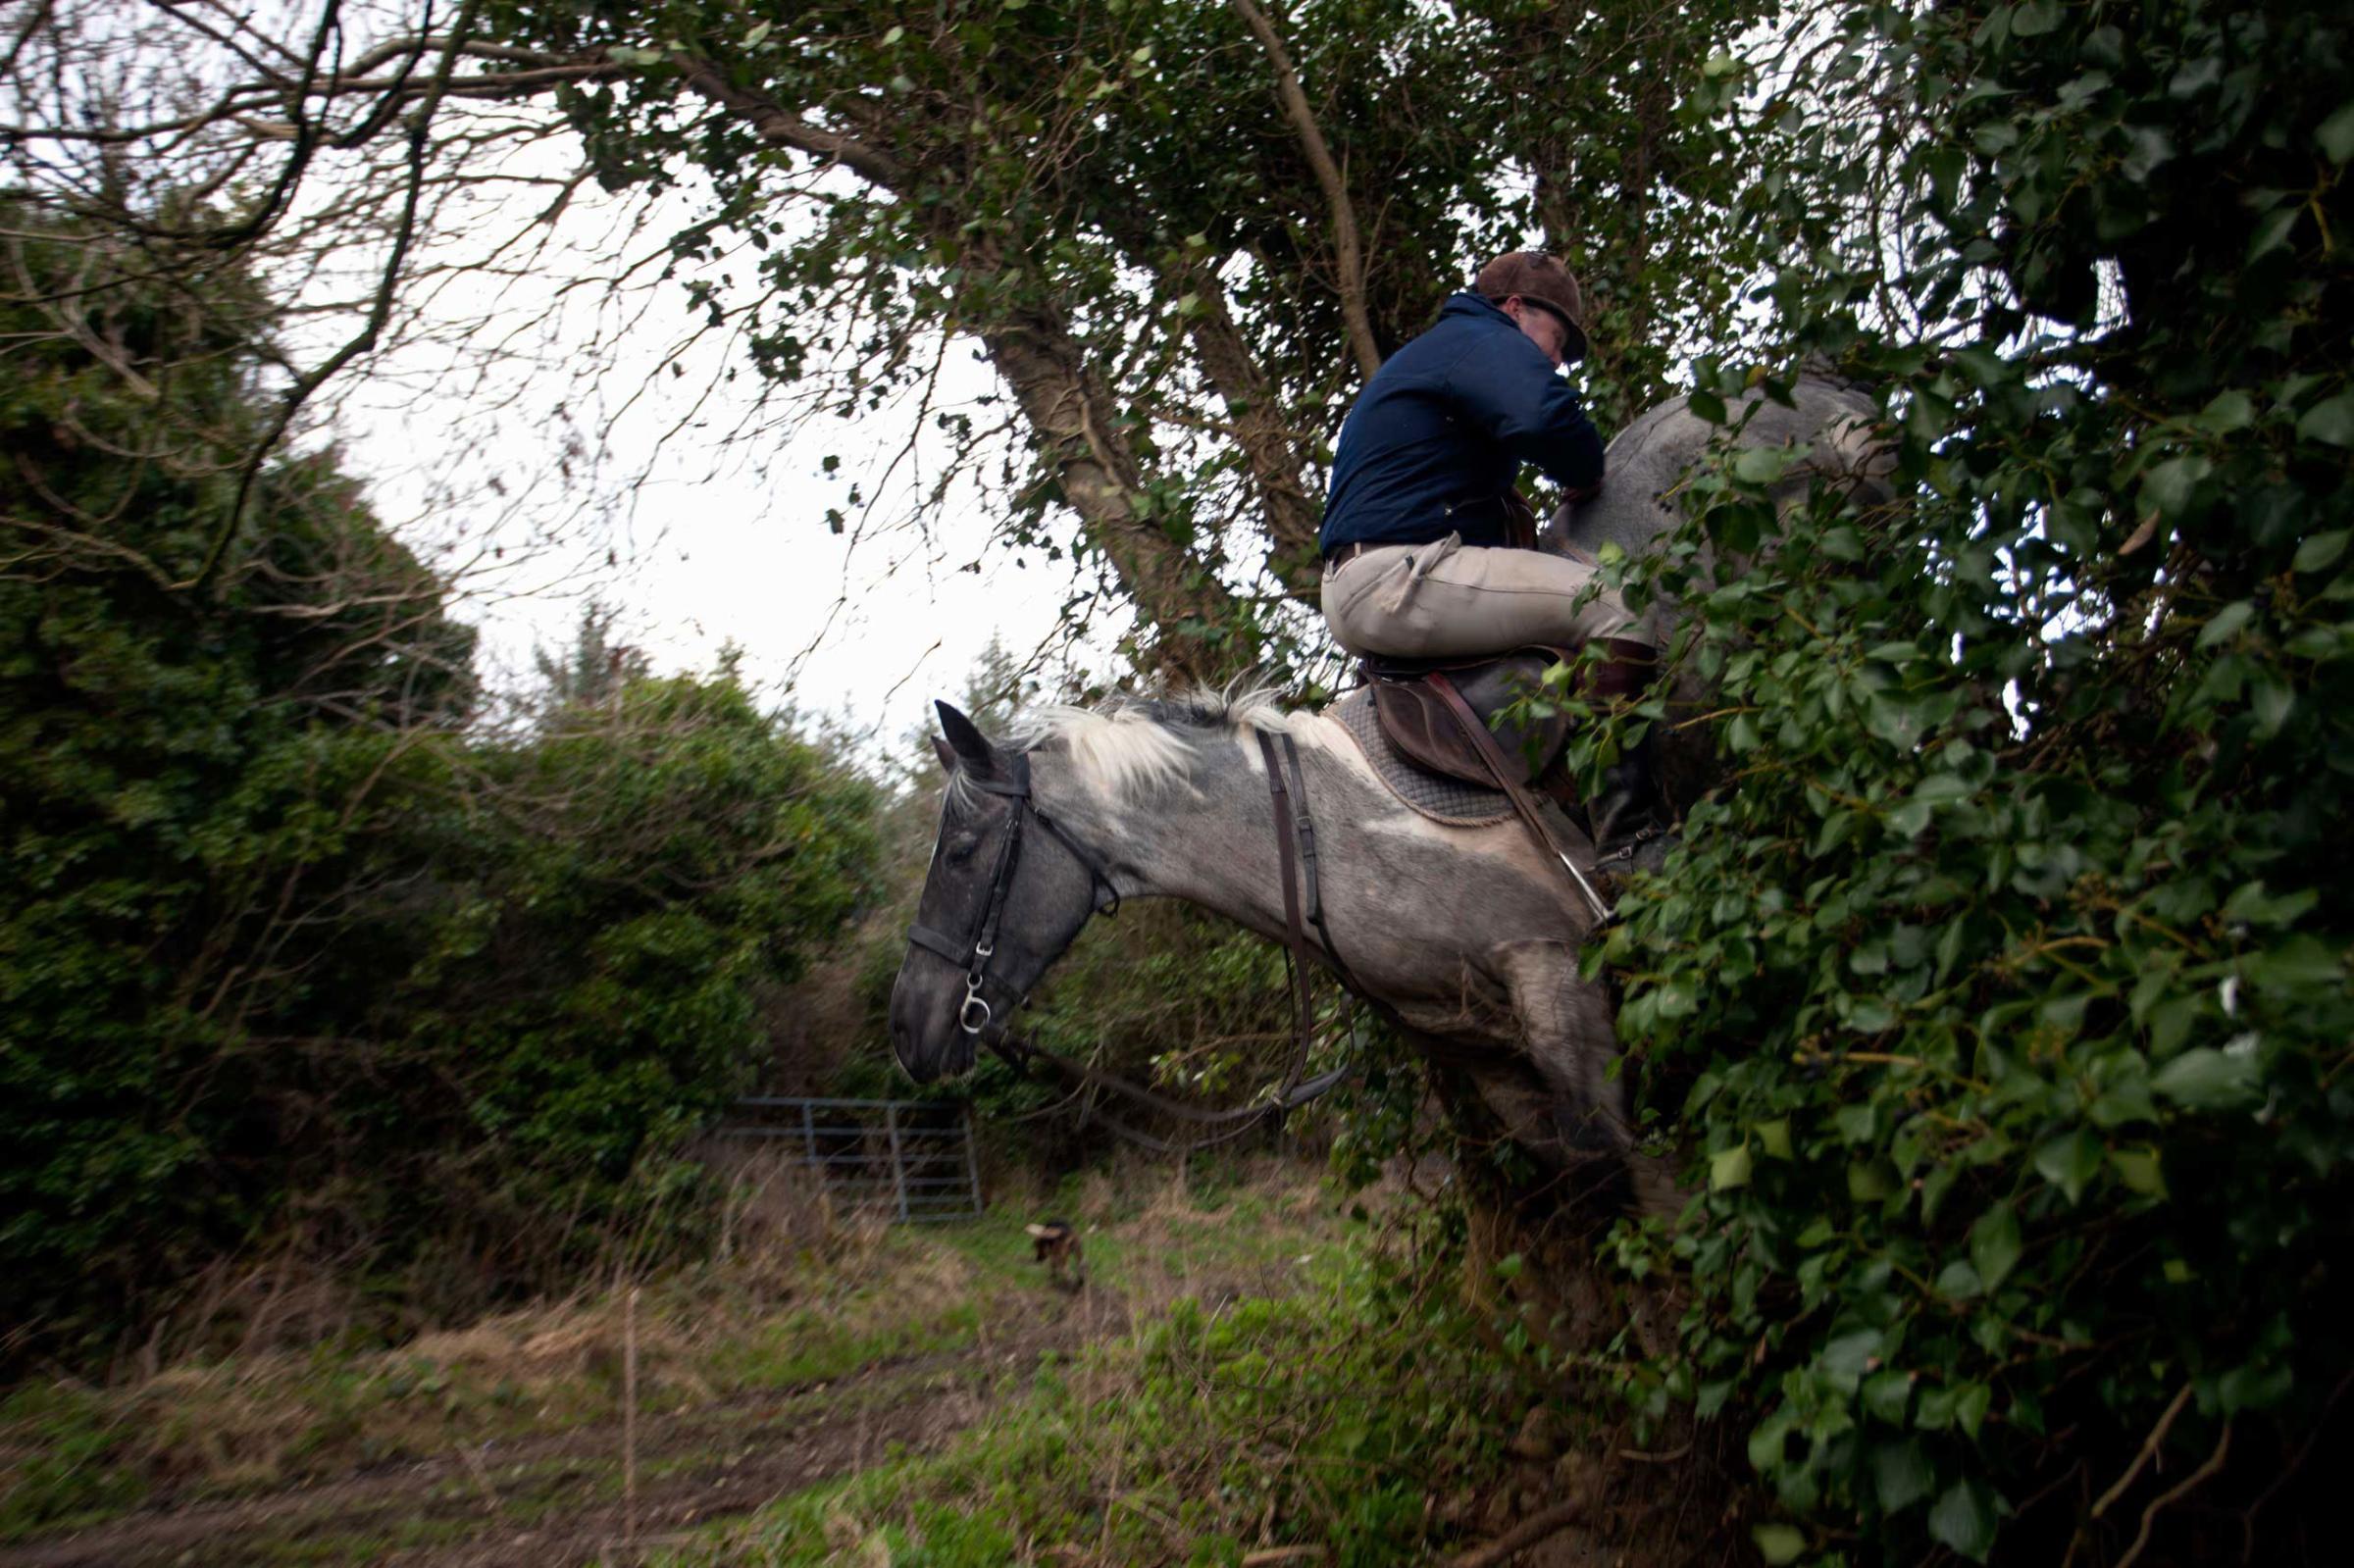 Grange. Killinick. Co.Wexford A man displays his horsemanship by riding backwards over a steep hedge during an afternoon with the Killinick Harriers Hunt Club.